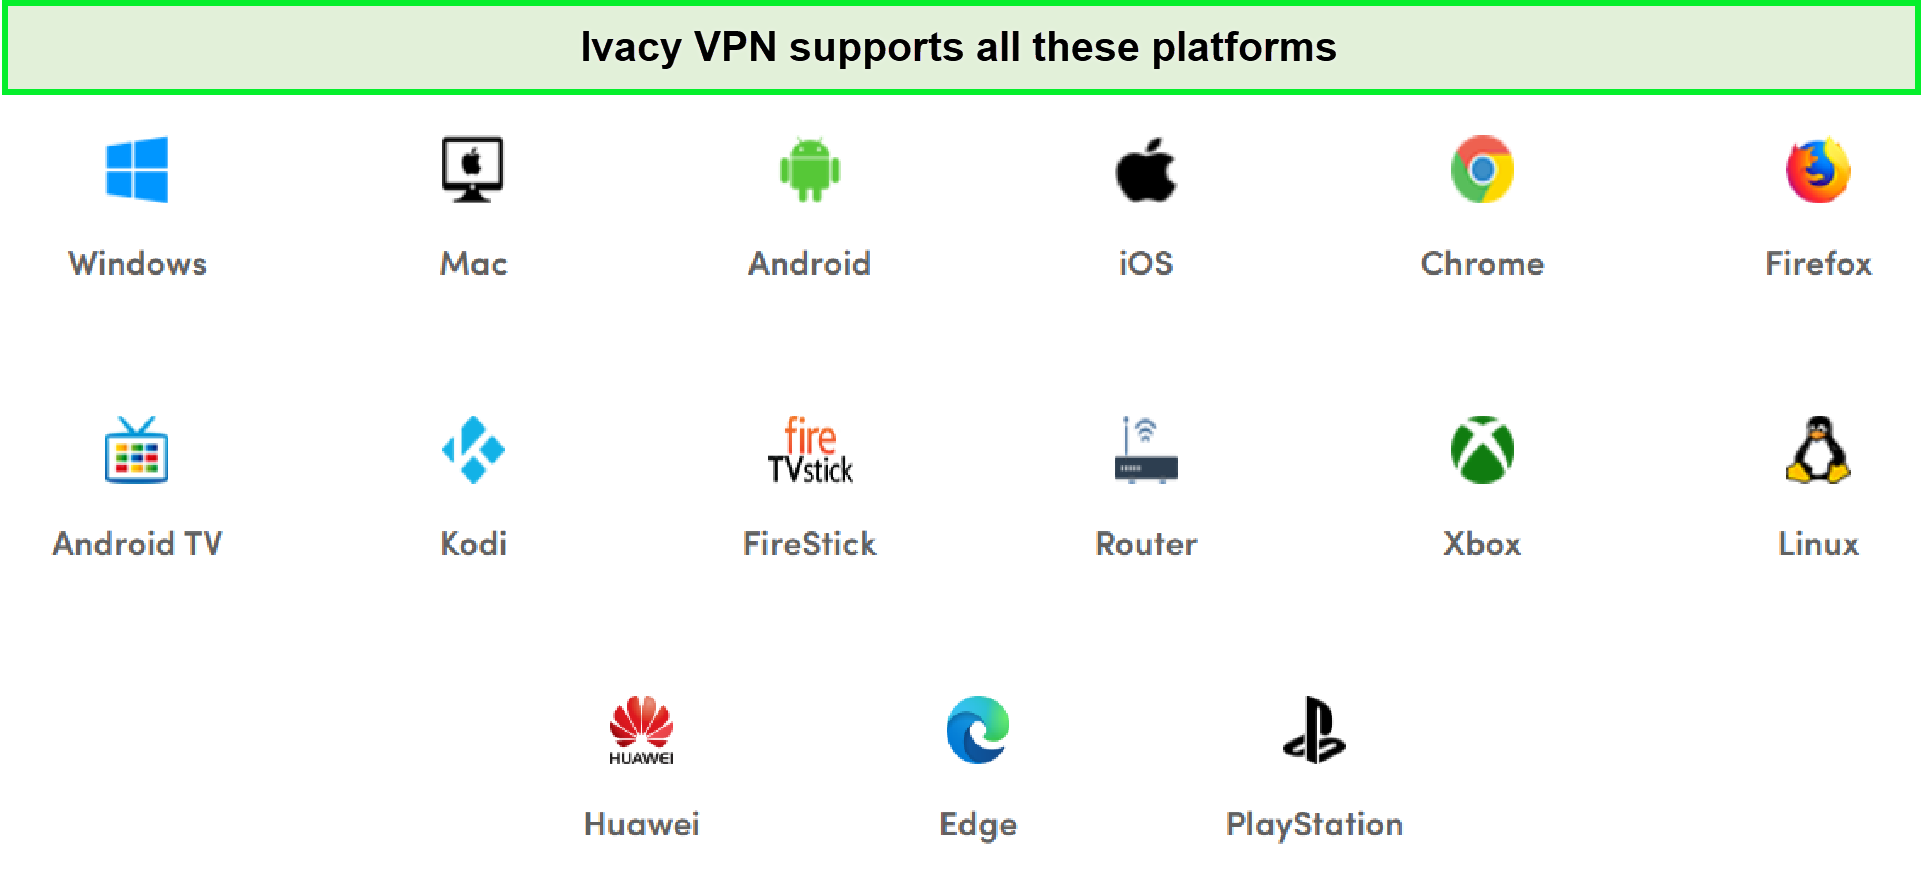 ivacy-device-compatibility-in-France